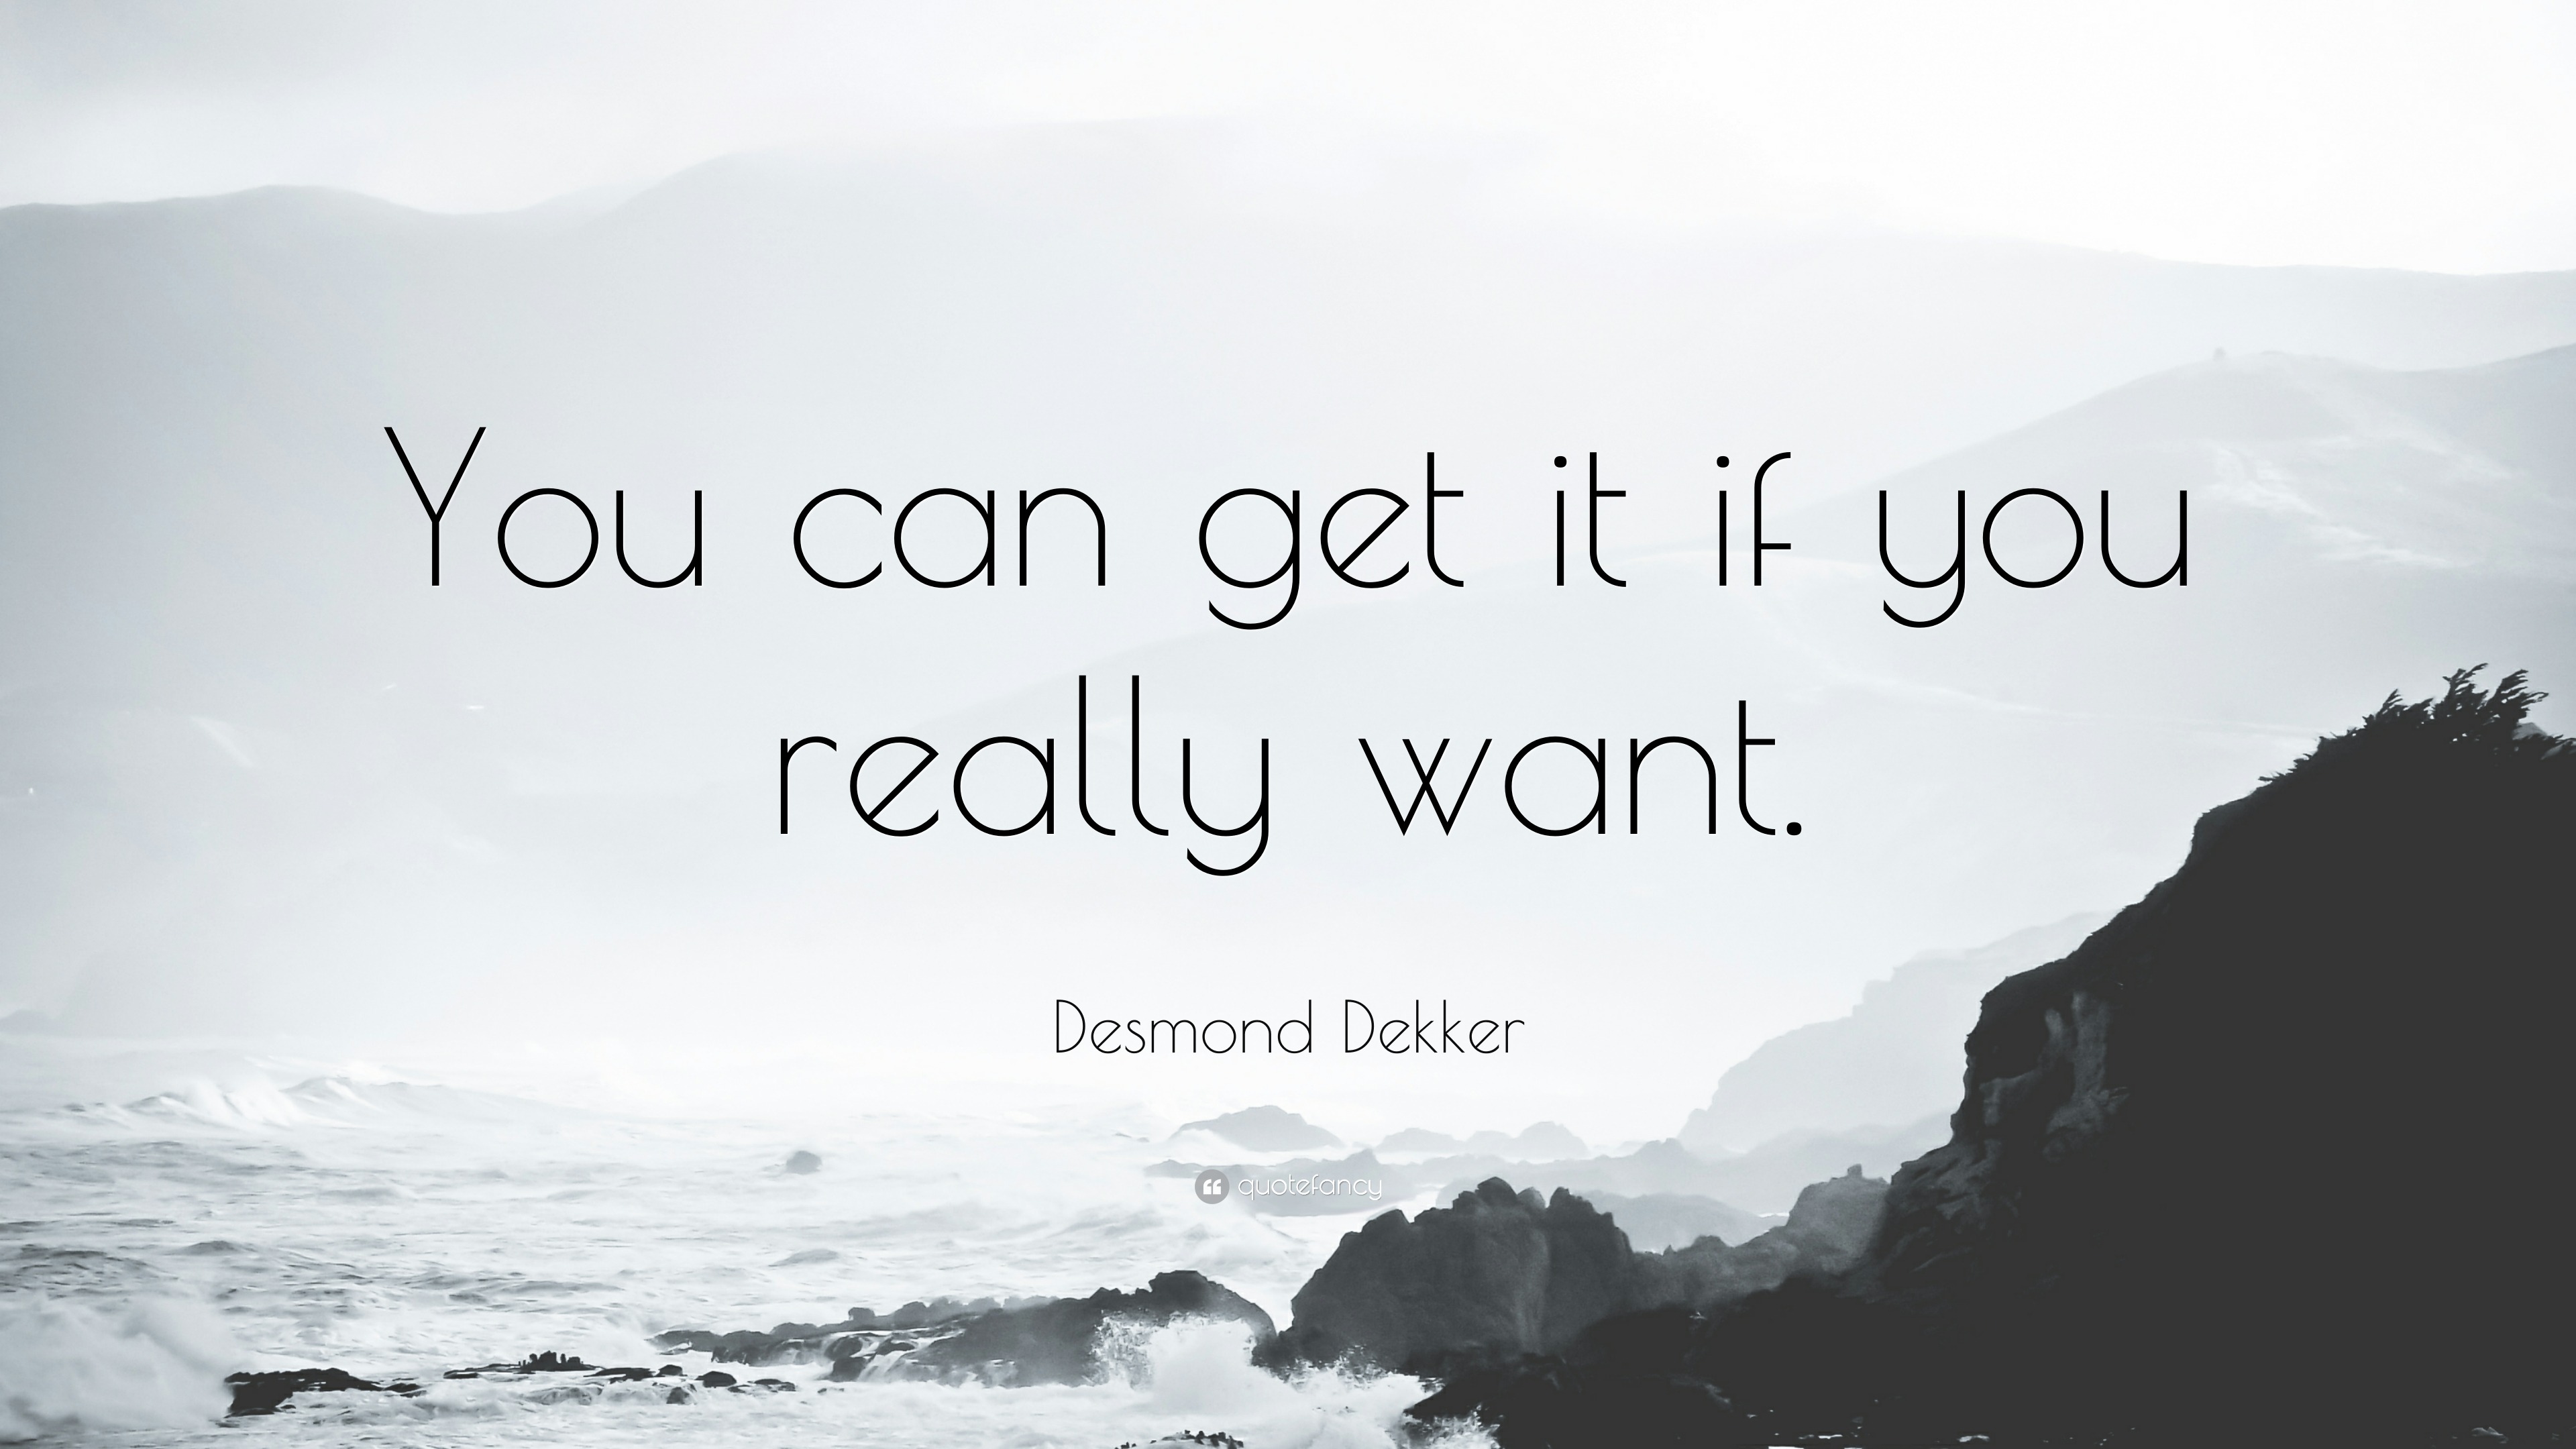 Desmond Dekker Quote: “You can get it if you really want.”